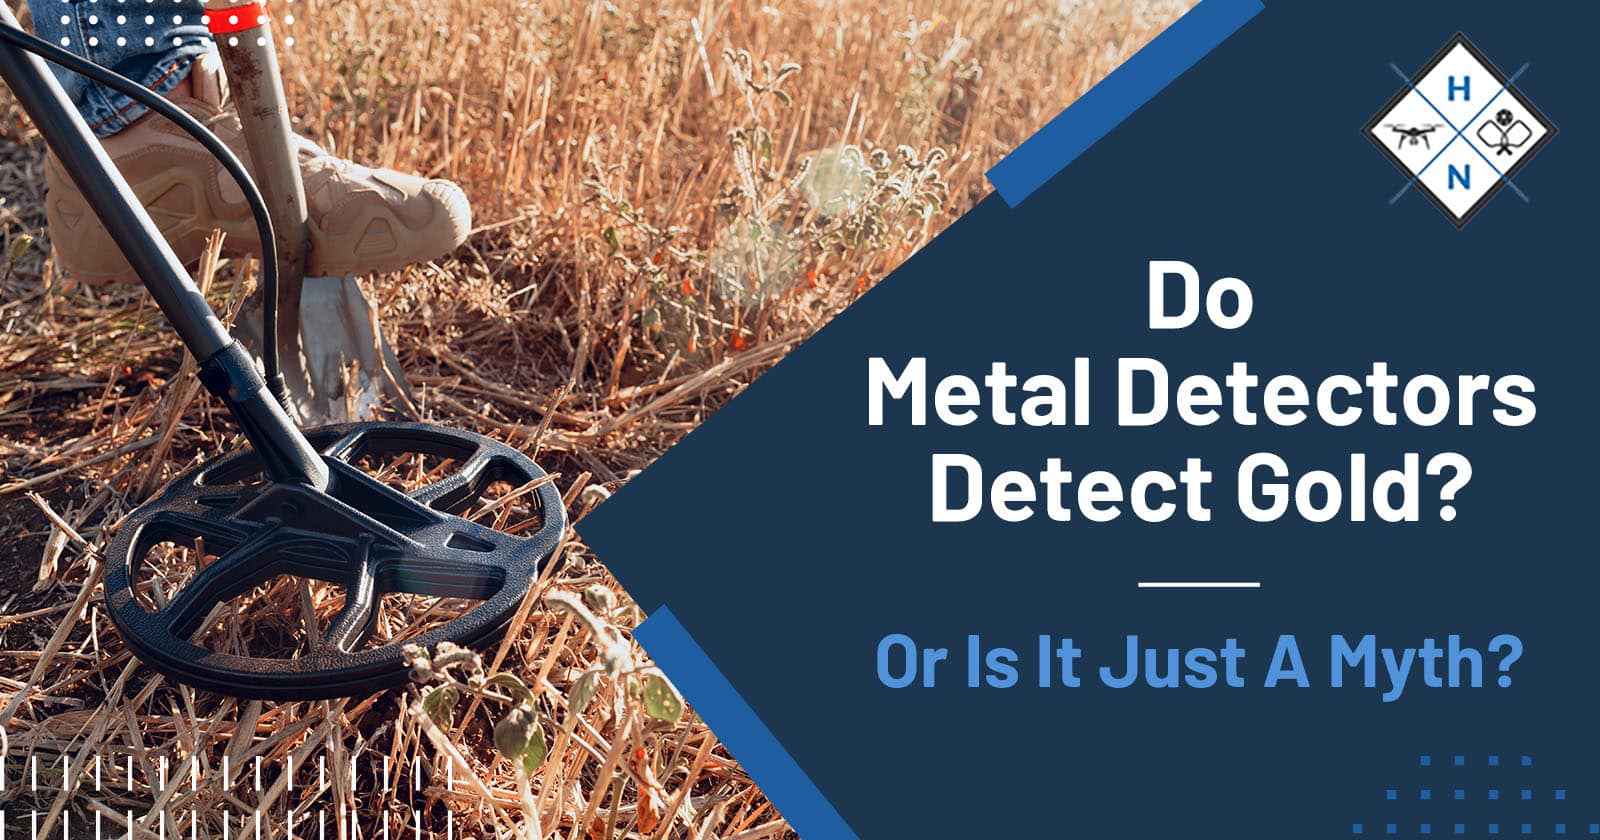 Do Metal Detectors Detect Gold? Or Is It Just A Myth?